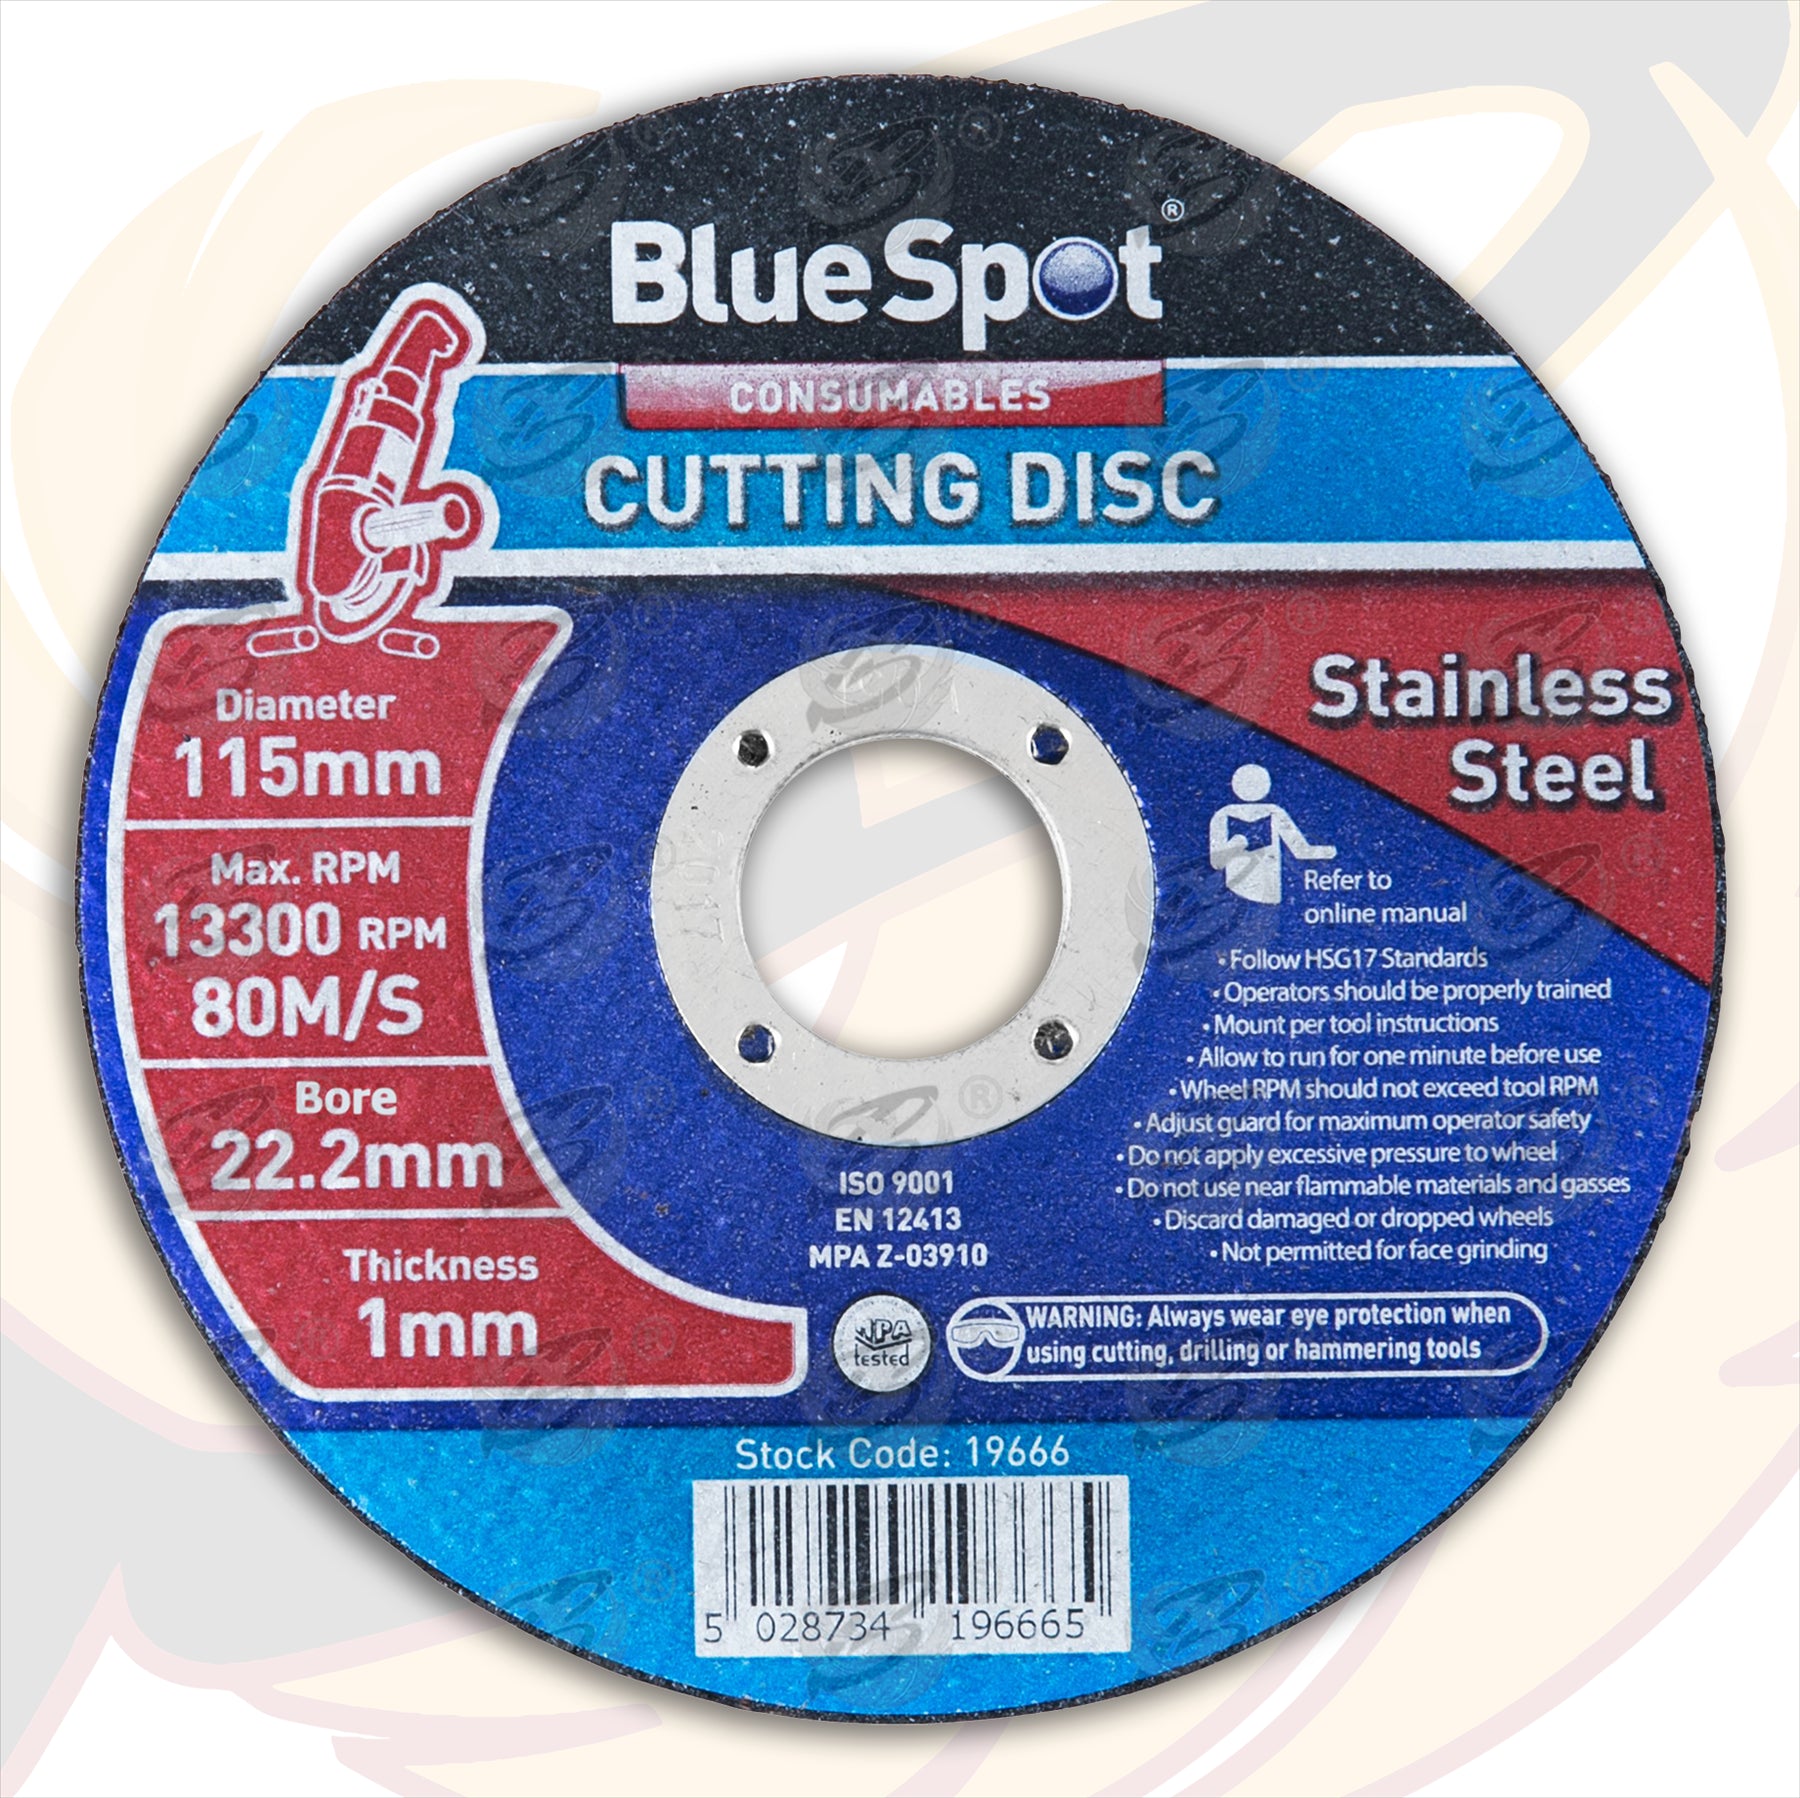 BLUESPOT 1MM THICK STAINLESS STEEL CUTTING DISCS ( X 50 DISCS )